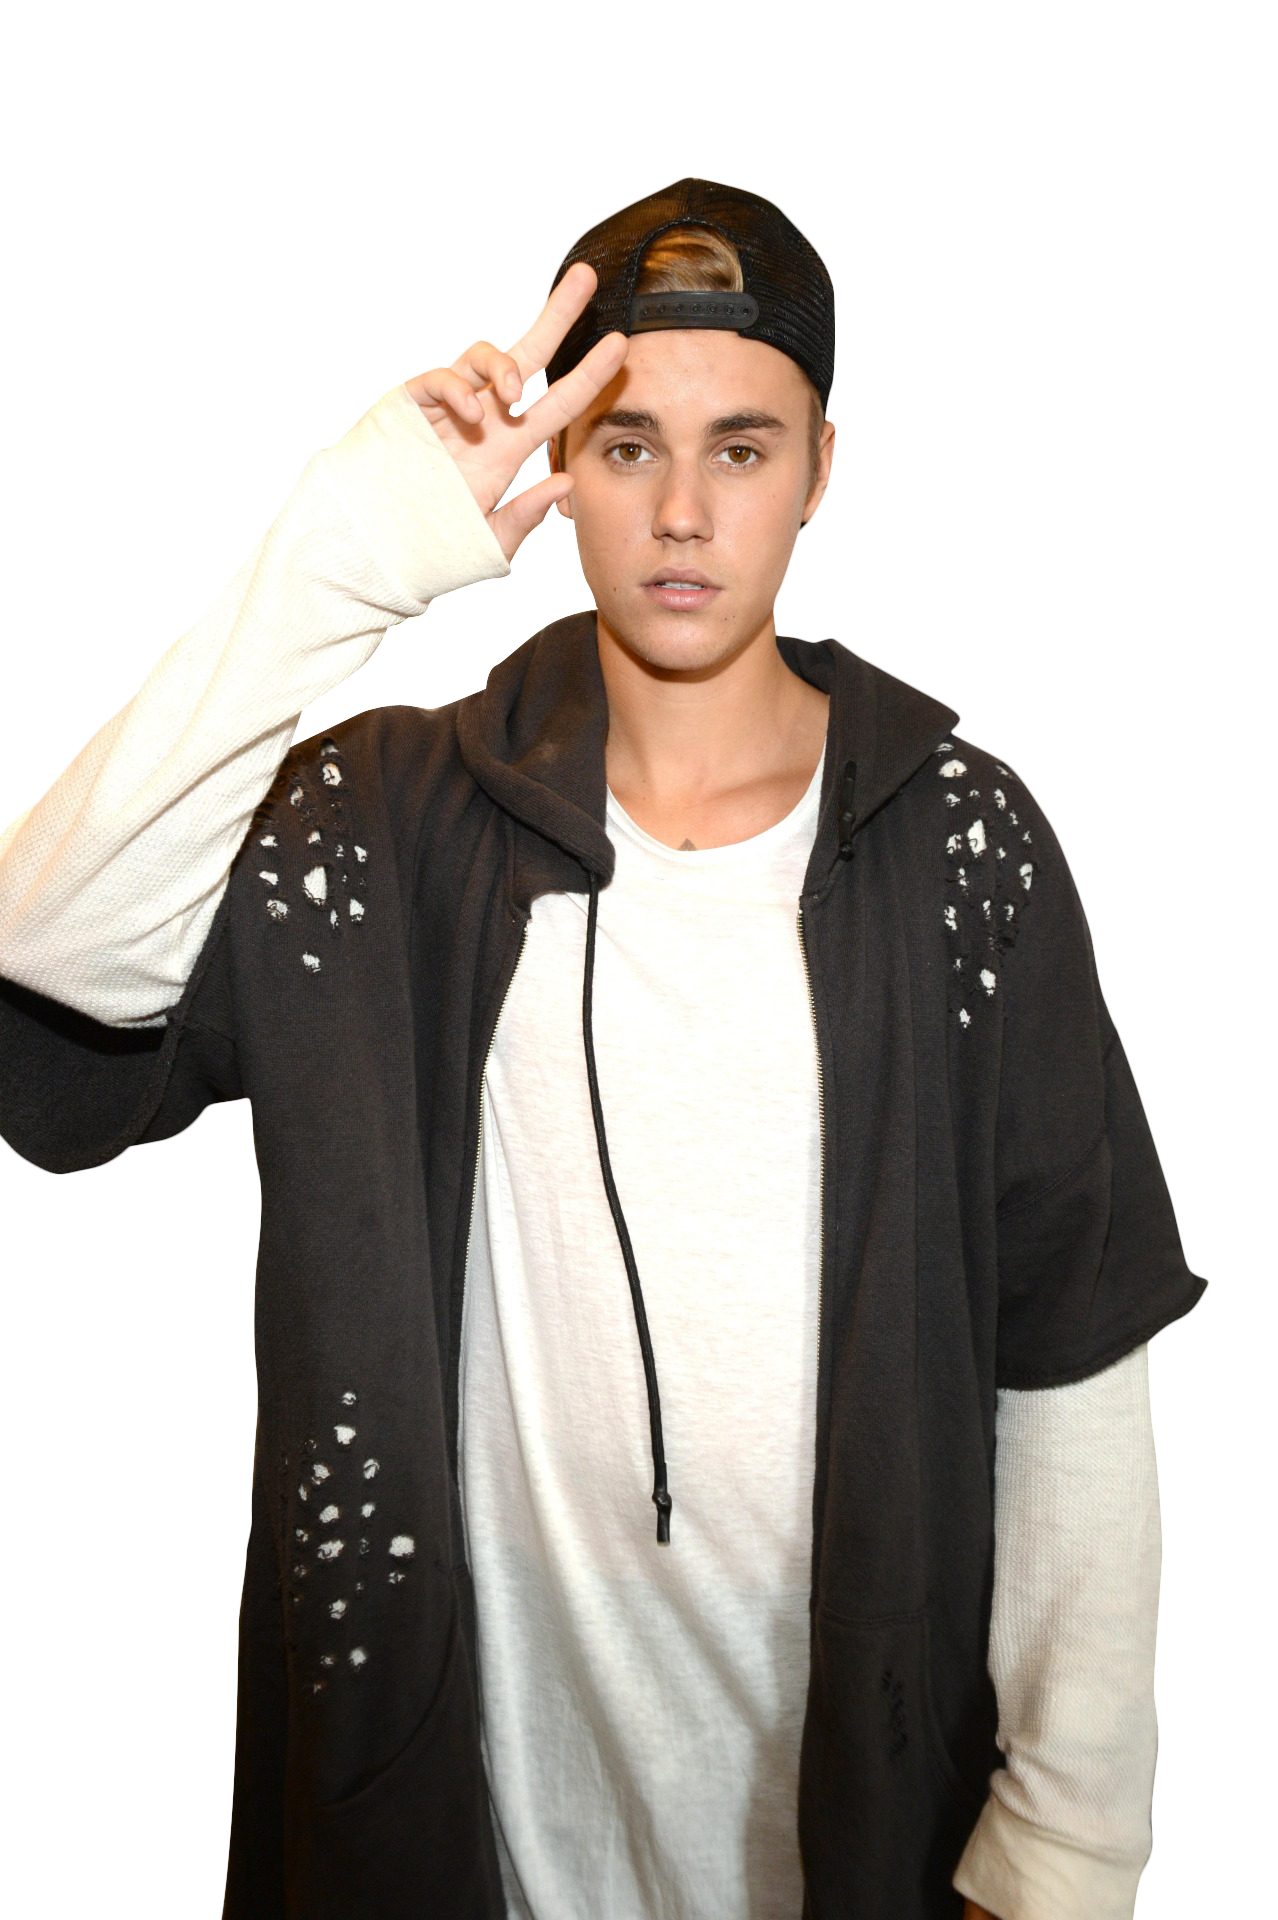 Justin Bieber nears $200 mln deal to sell music rights - WSJ | Reuters